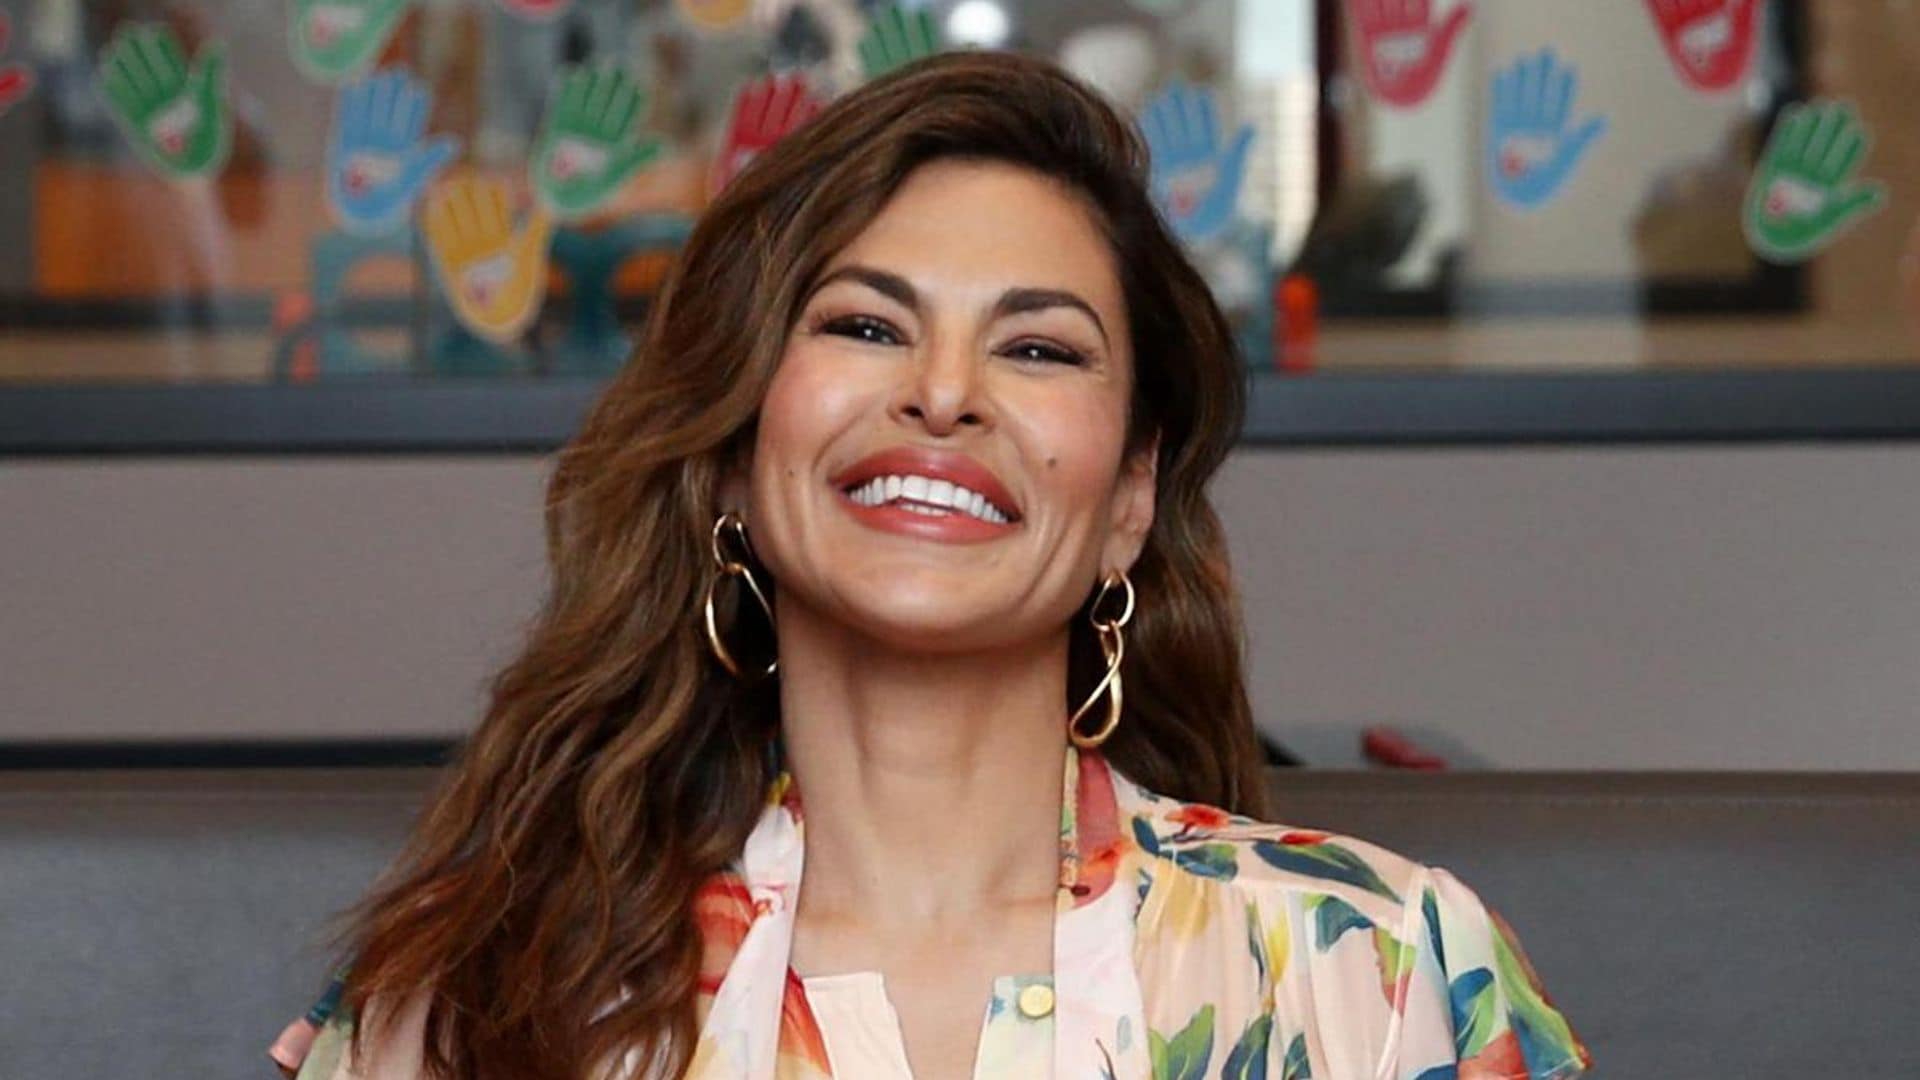 Eva Mendes shares a child’s story who is fighting a rare and aggressive brain cancer